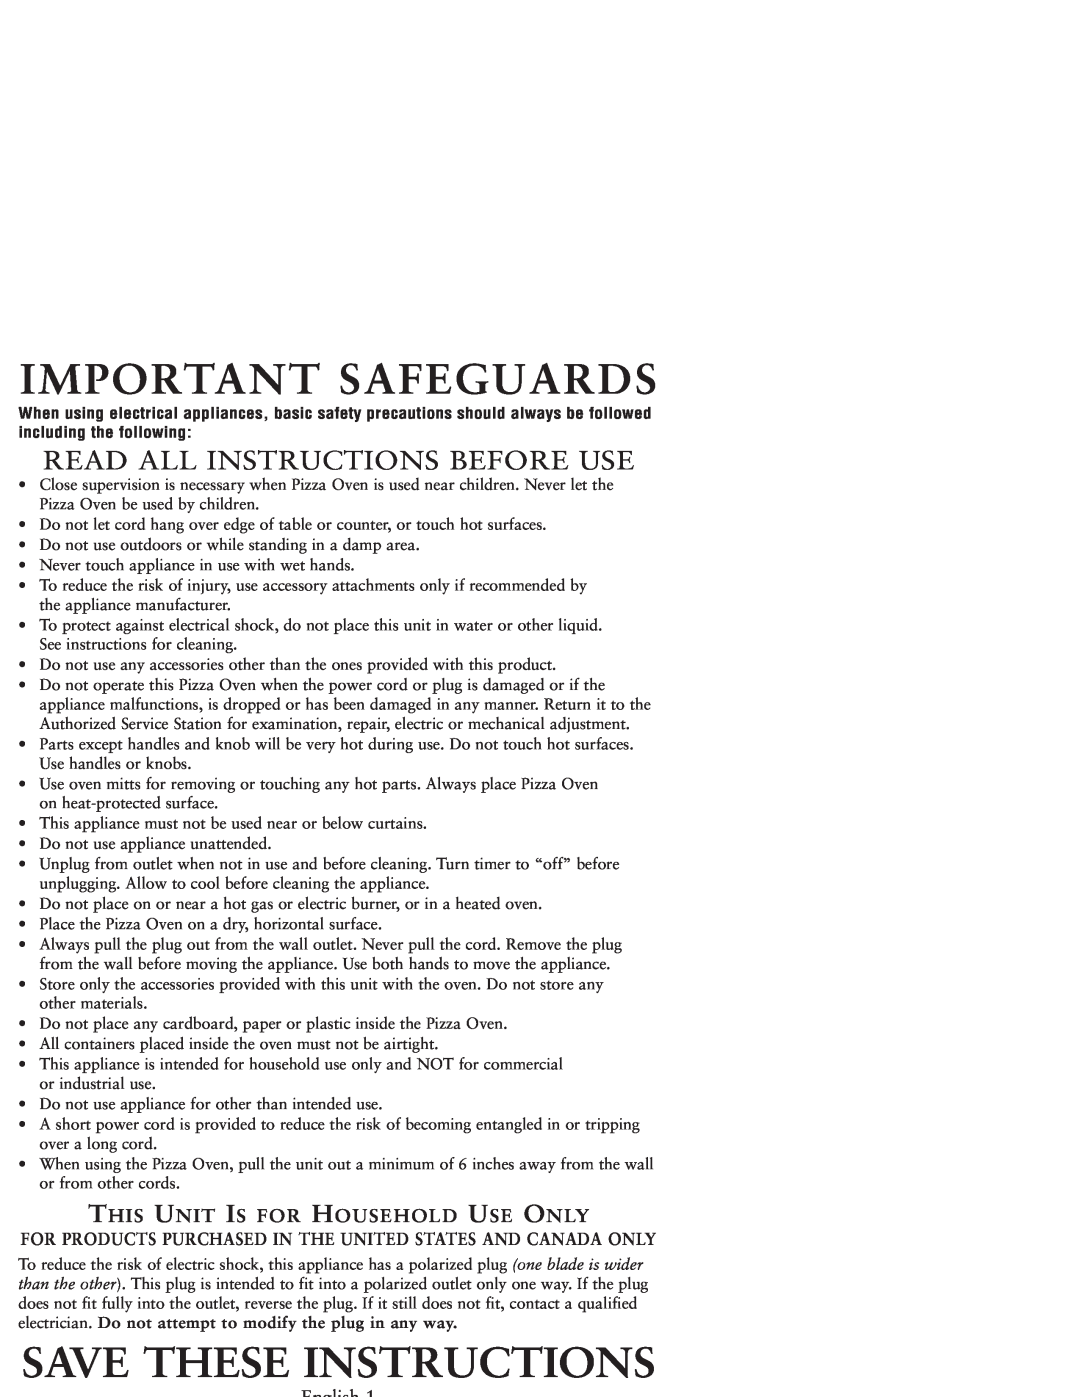 Sunbeam 3224 user manual Important Safeguards, Save These Instructions, English, Read All Instructions Before Use 